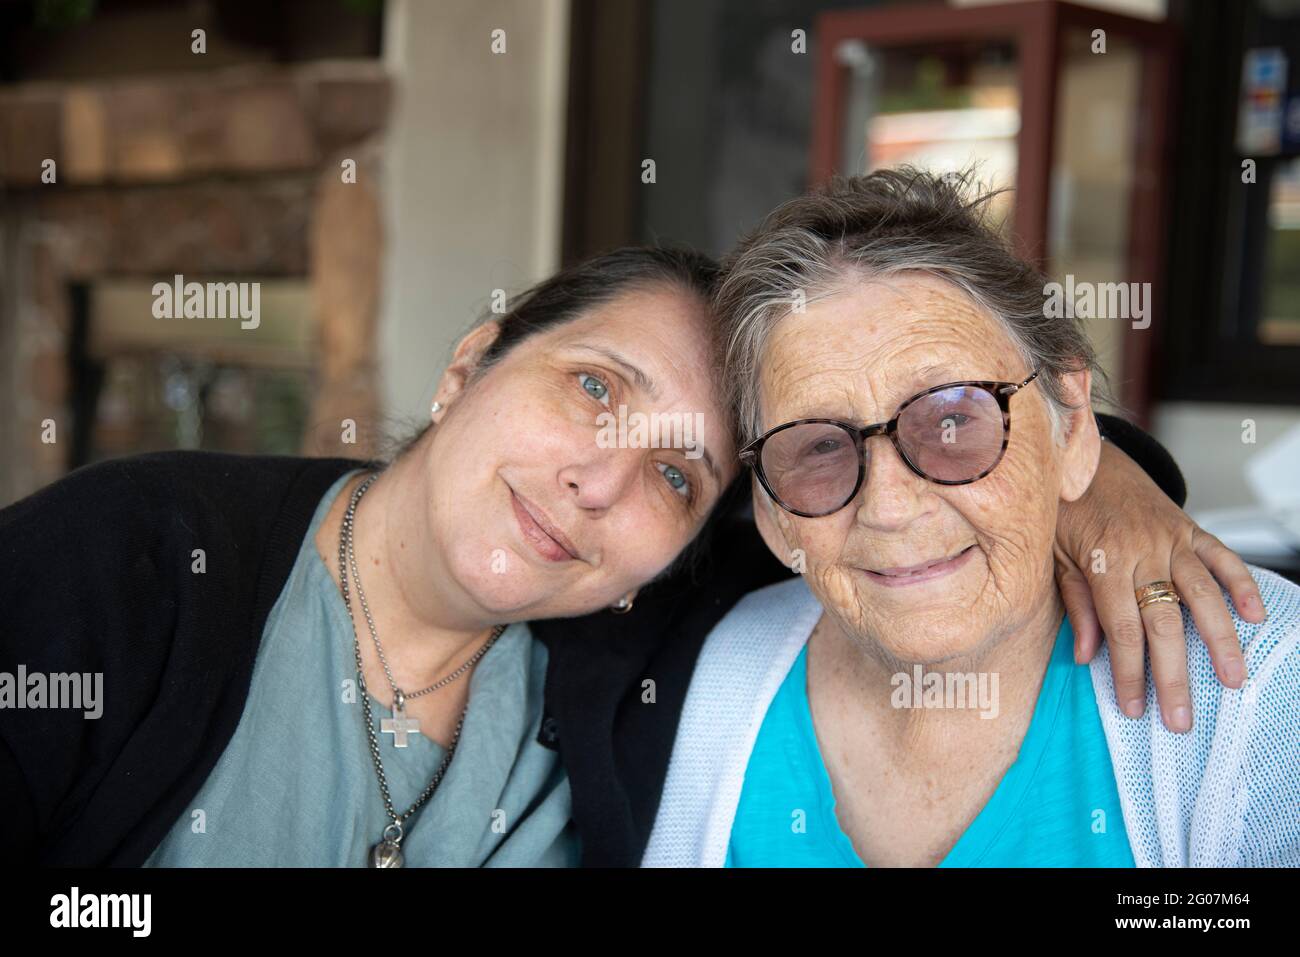 A 53 year old daughter with her 85 year old mother; Anaheim, California. Stock Photo